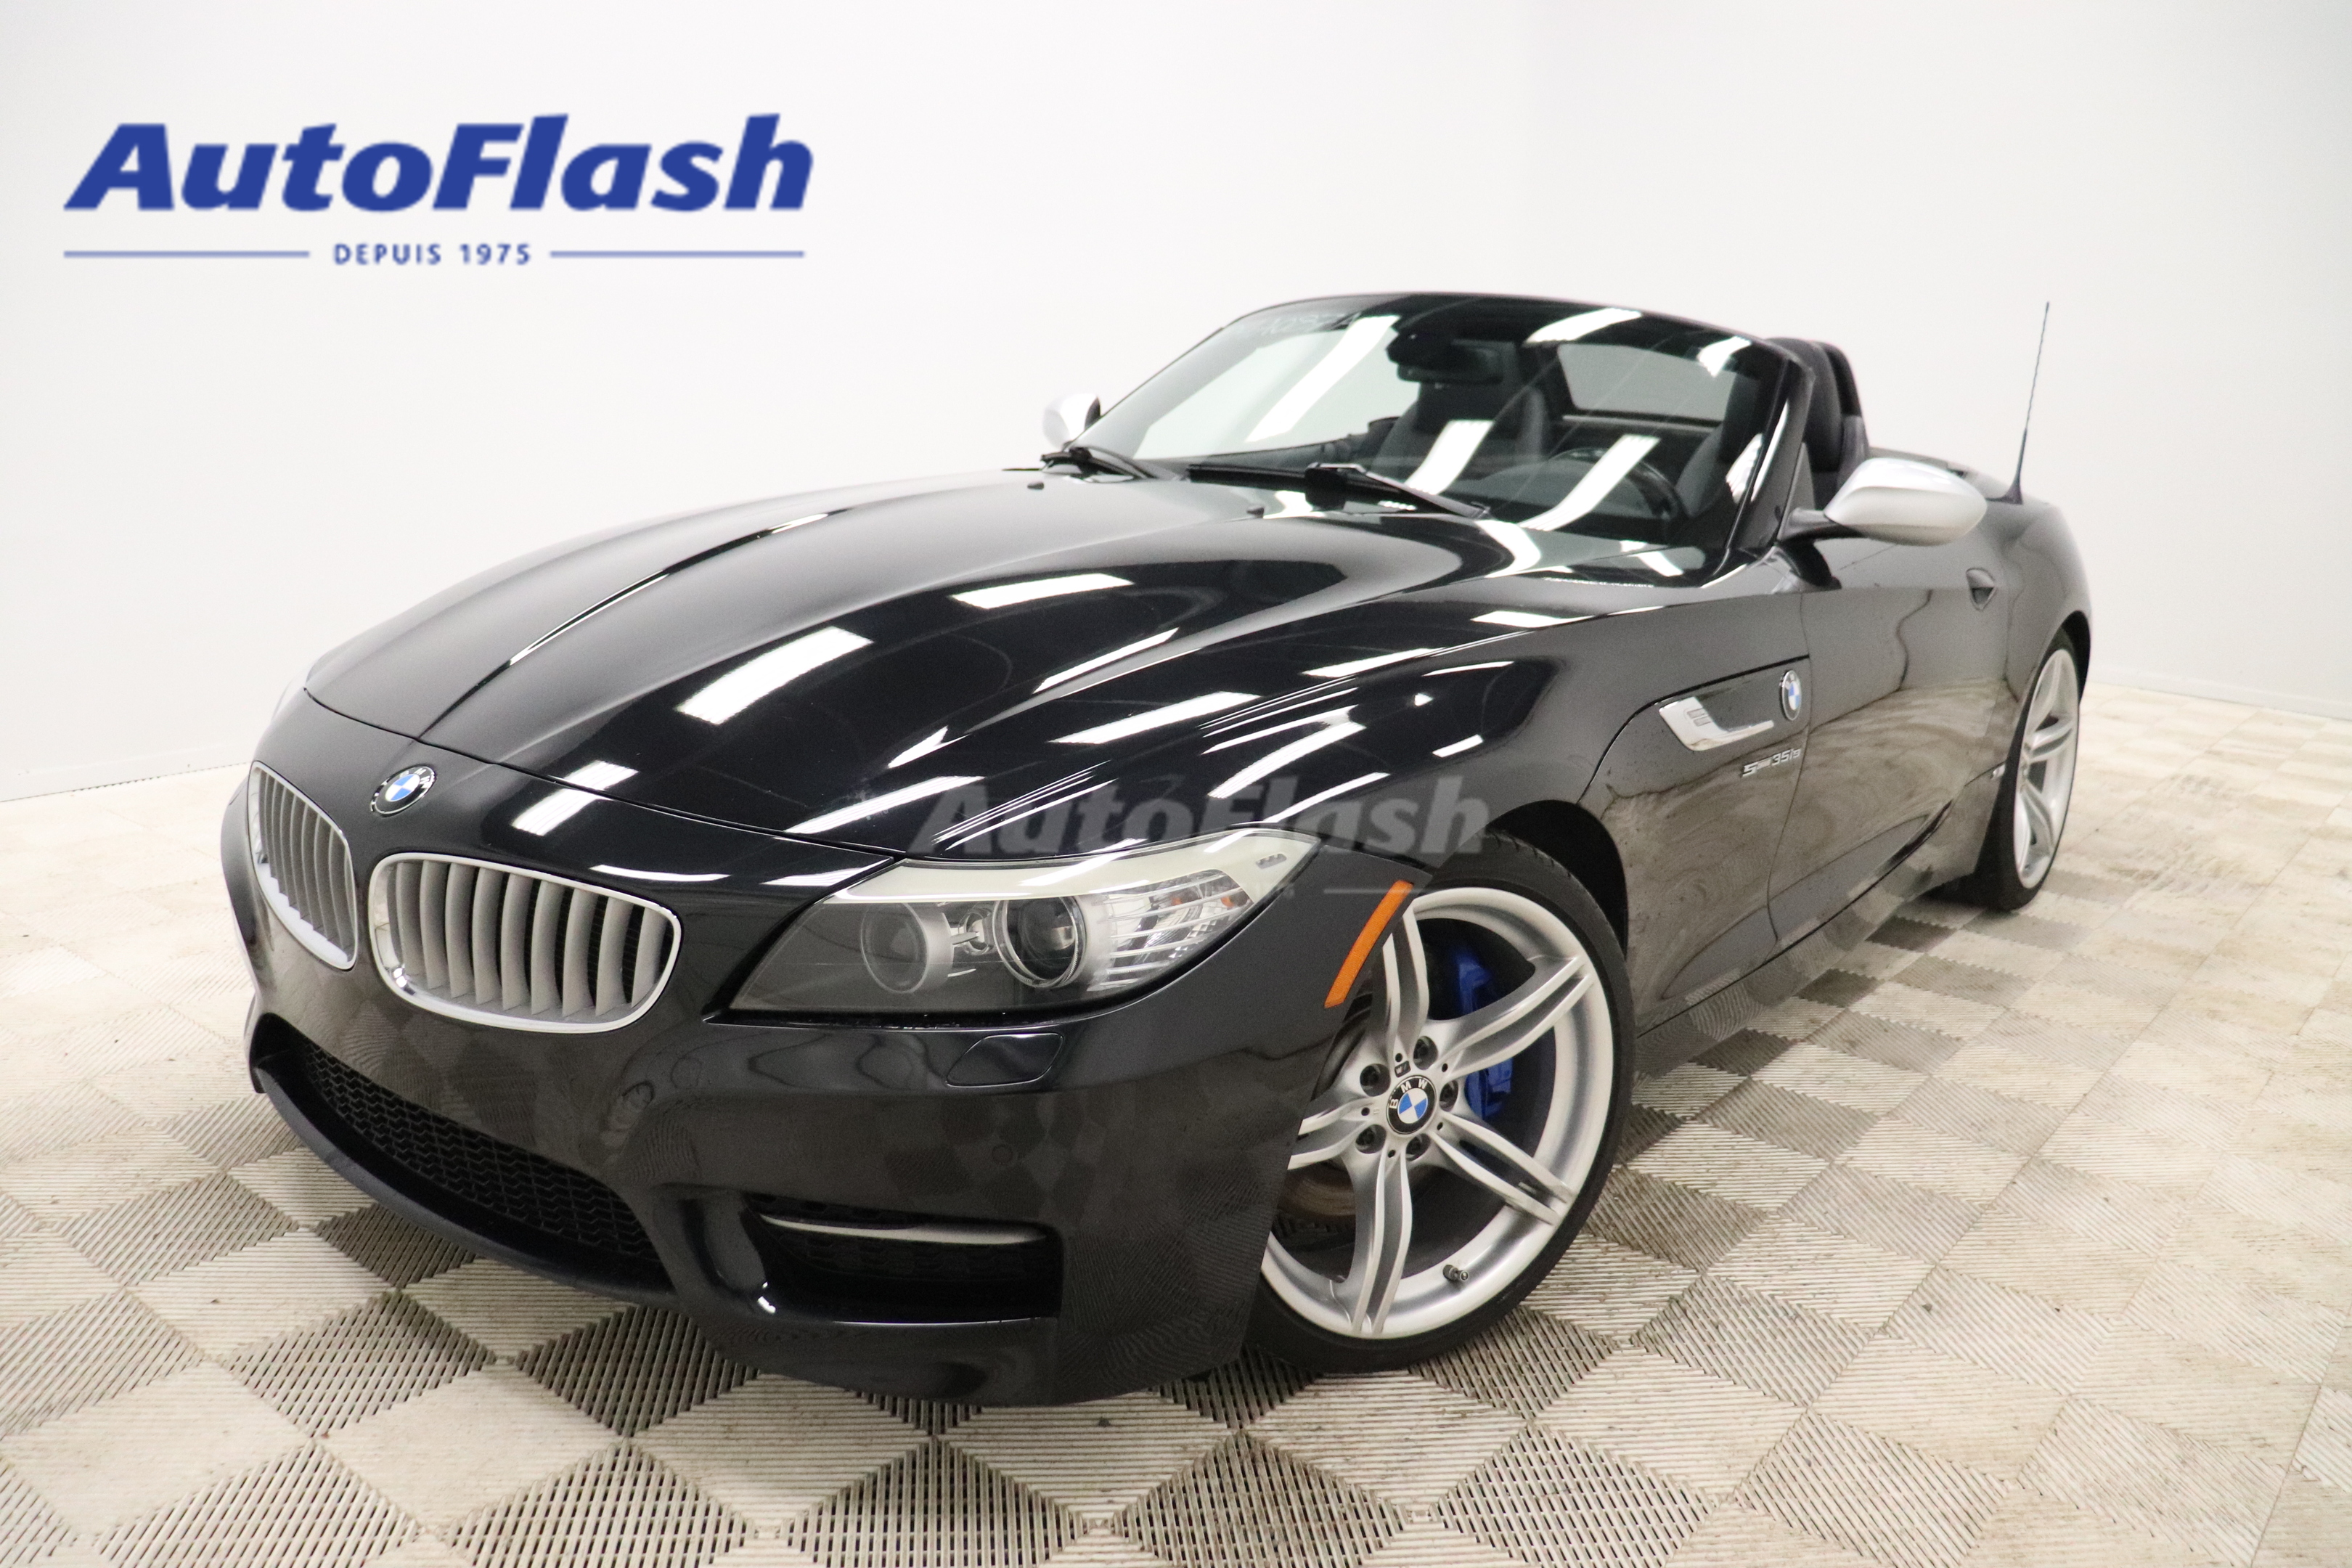 2012 BMW Z4 35is, 3.0L V6, 335HP, CONVERTIBLE, M-SPORT, GPS